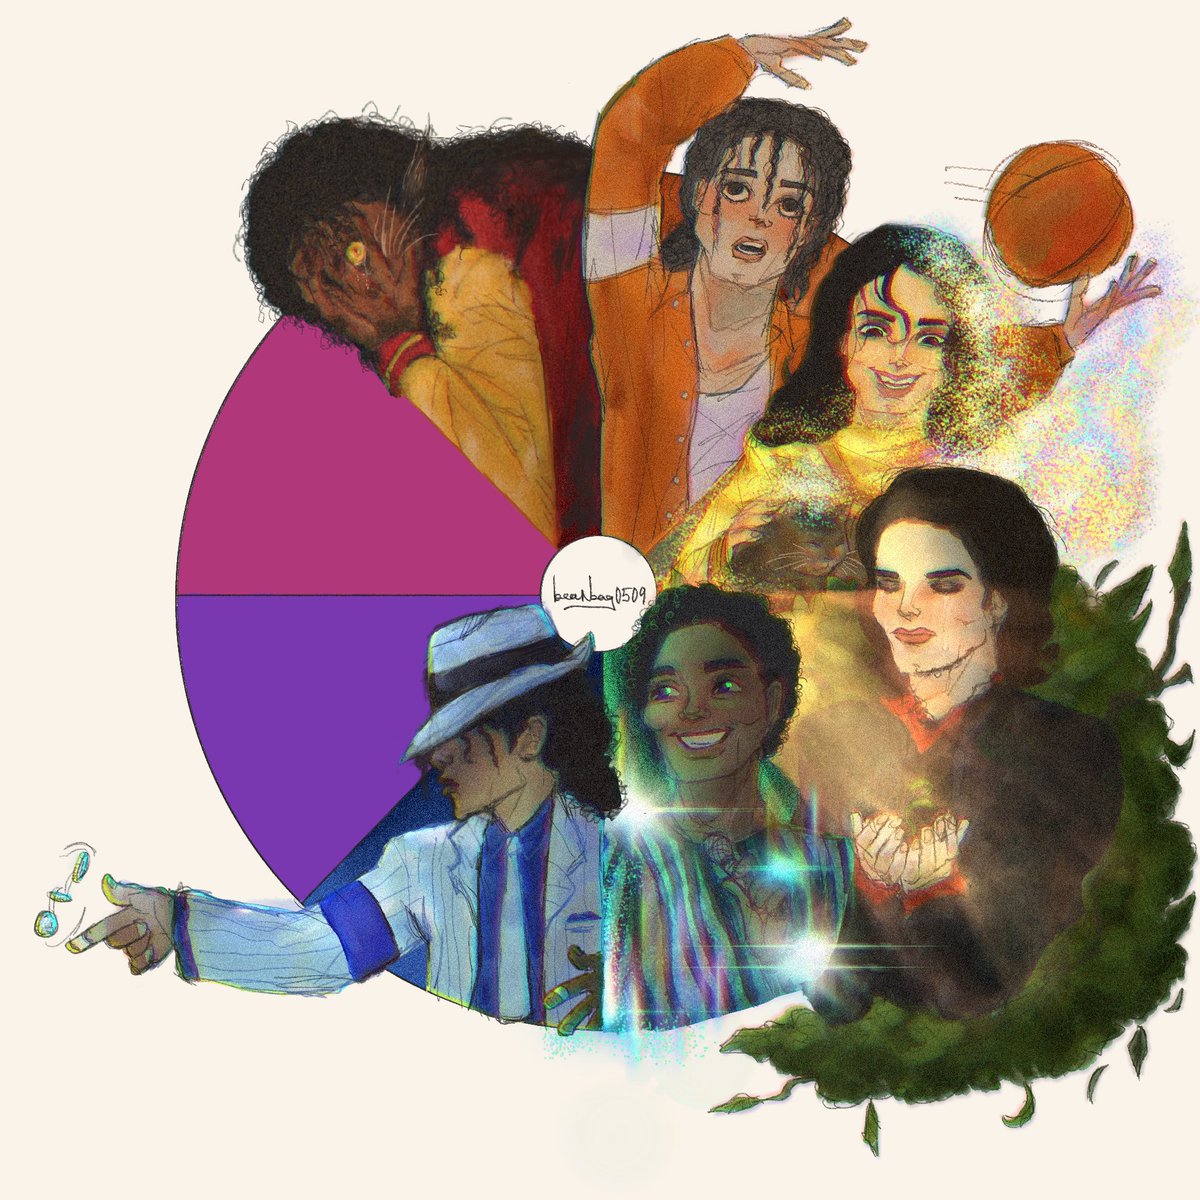 🕴🏽🪙💙 SMOOTH CRIMINAL 💙🪙🕴🏽

i swear, i tried to fit the lean in, but it just wasn’t gonna happen 😭 only two more to go!!
#michaeljackson #colorwheelchallenge